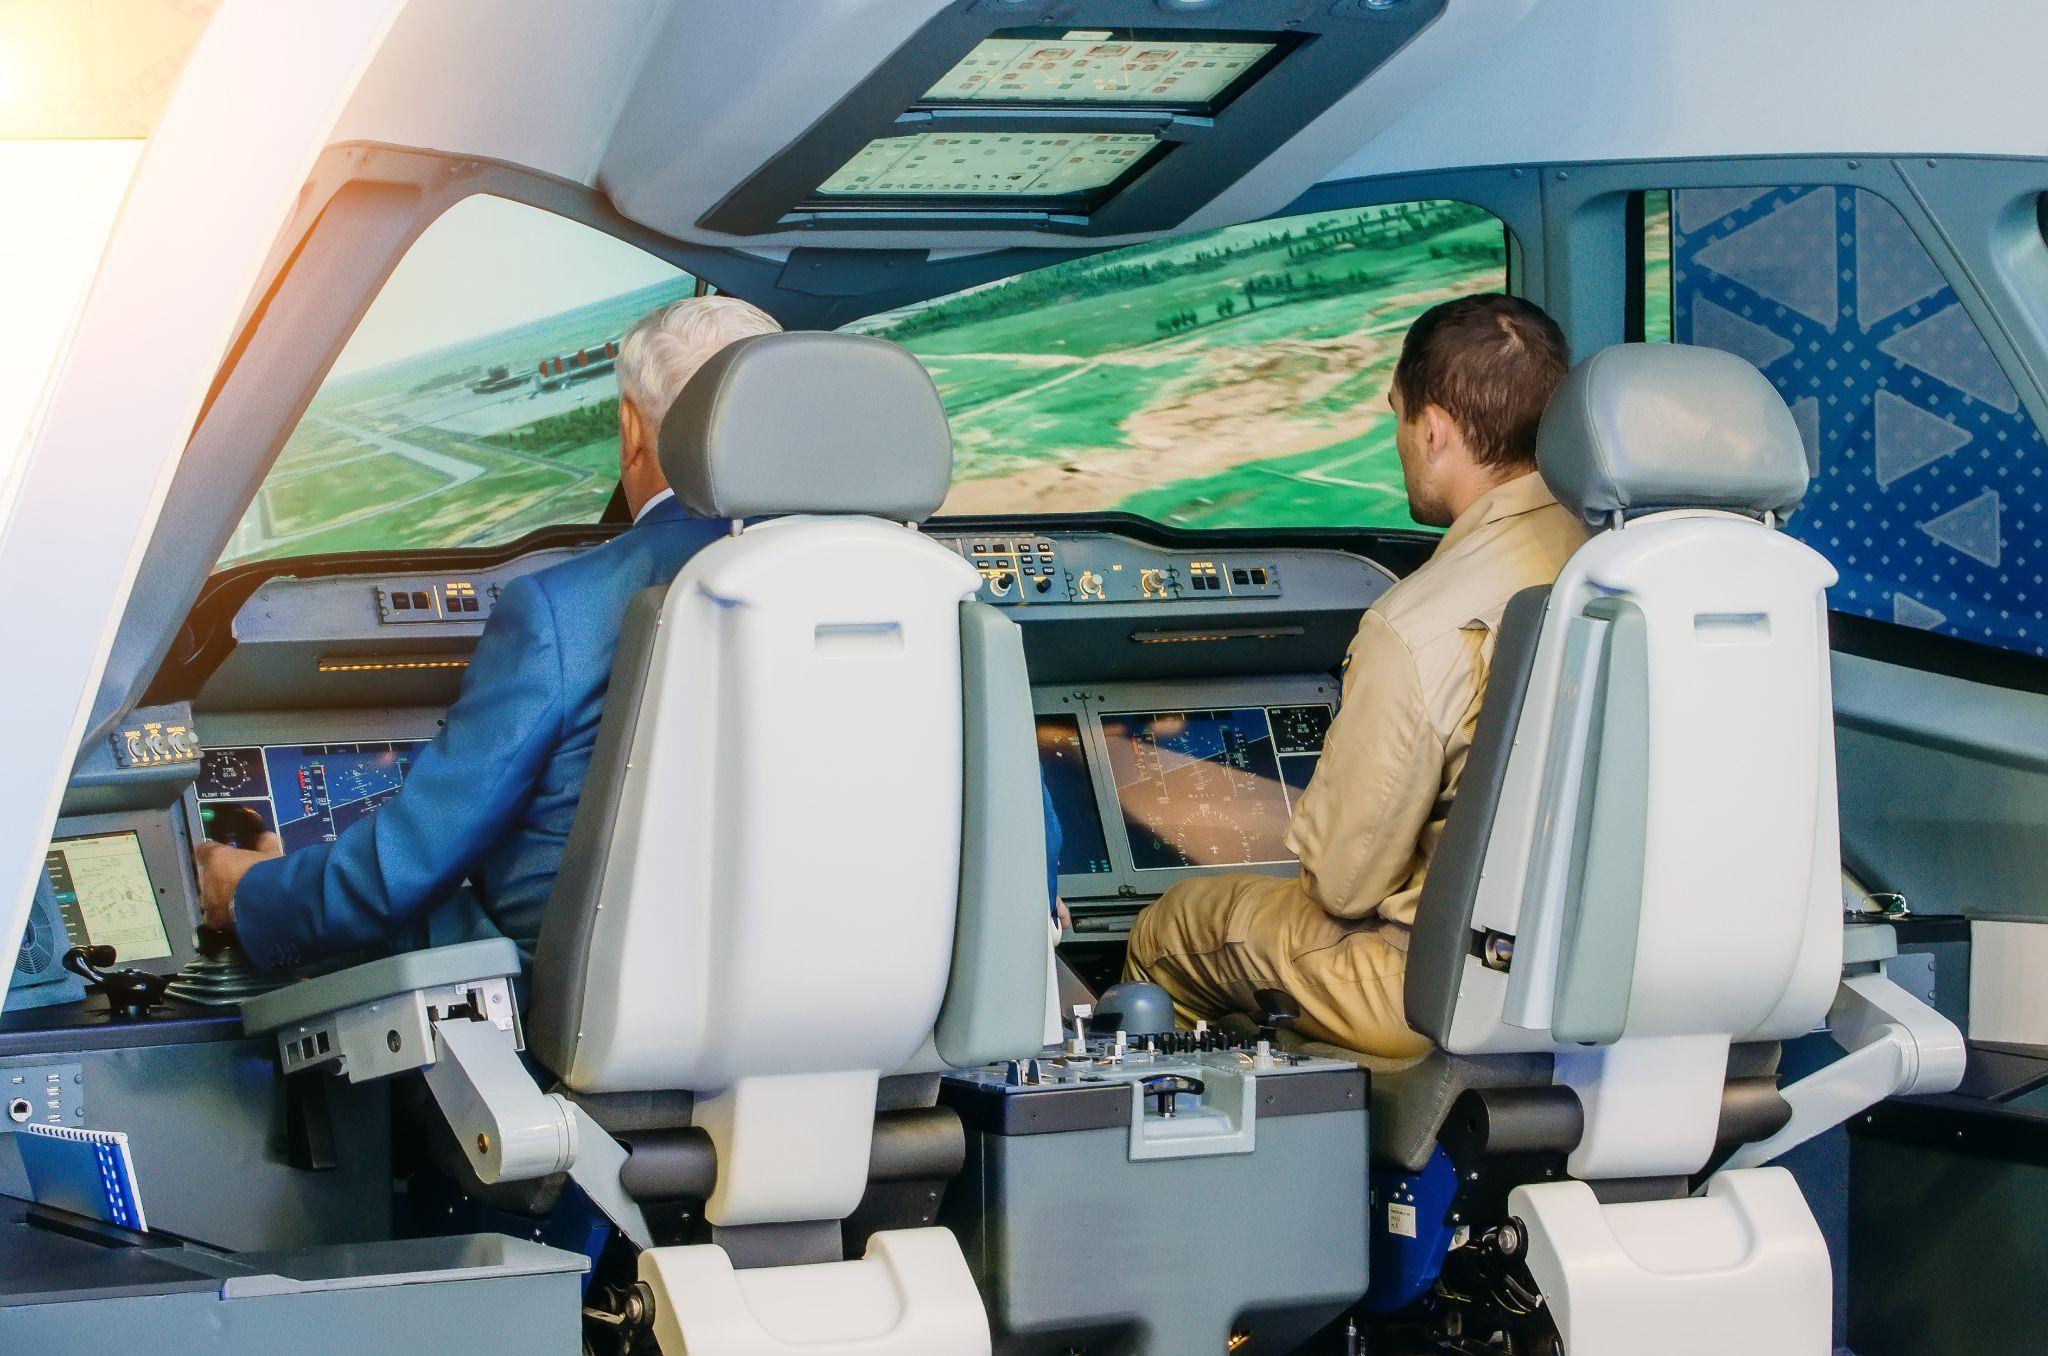 The simulator of a passenger aircraft with a cockpit and pilots